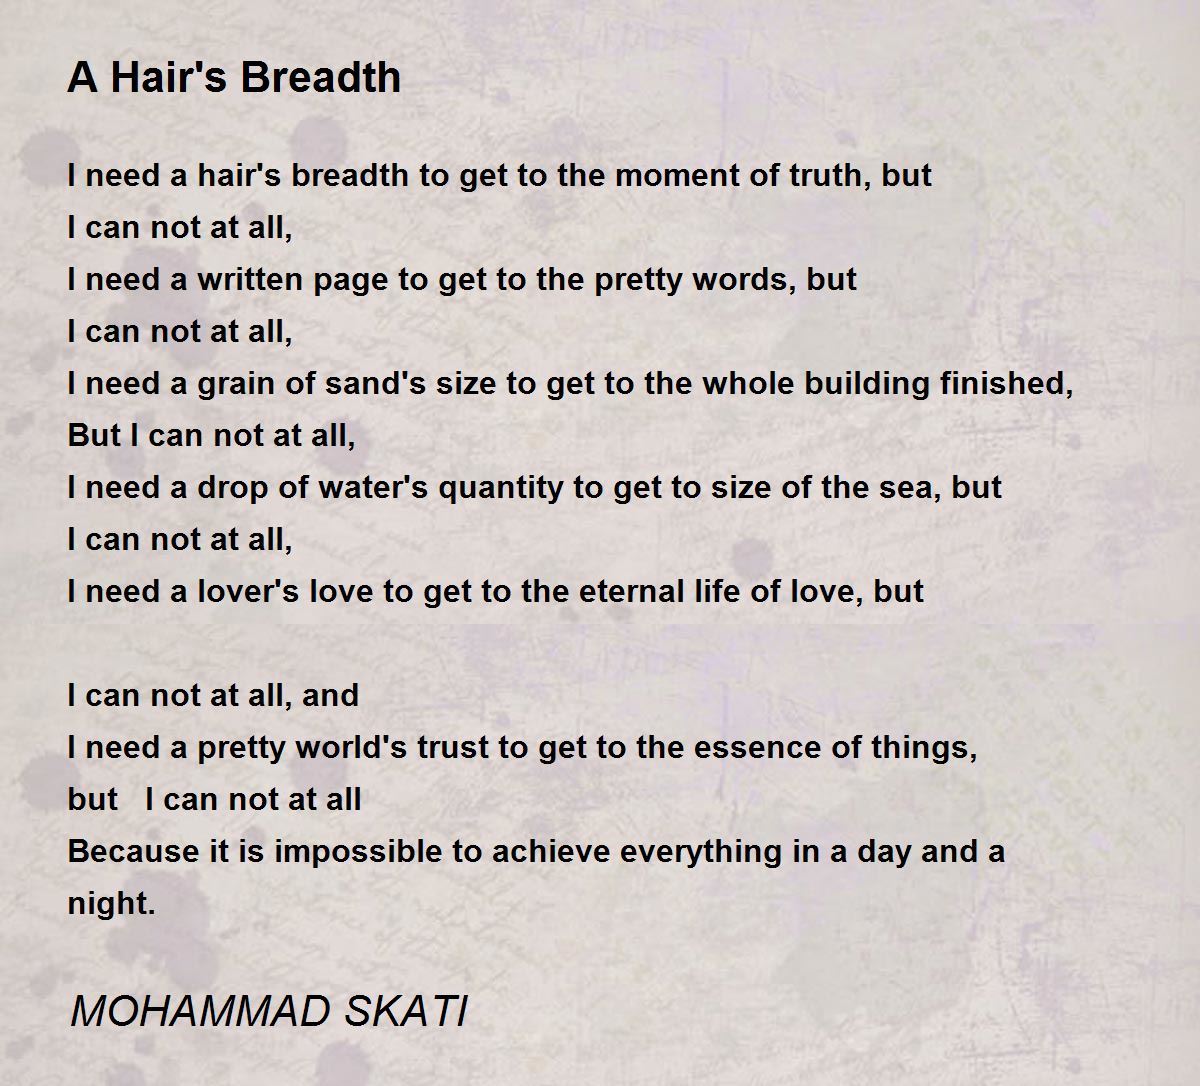 A Hair's Breadth - A Hair's Breadth Poem by MOHAMMAD SKATI